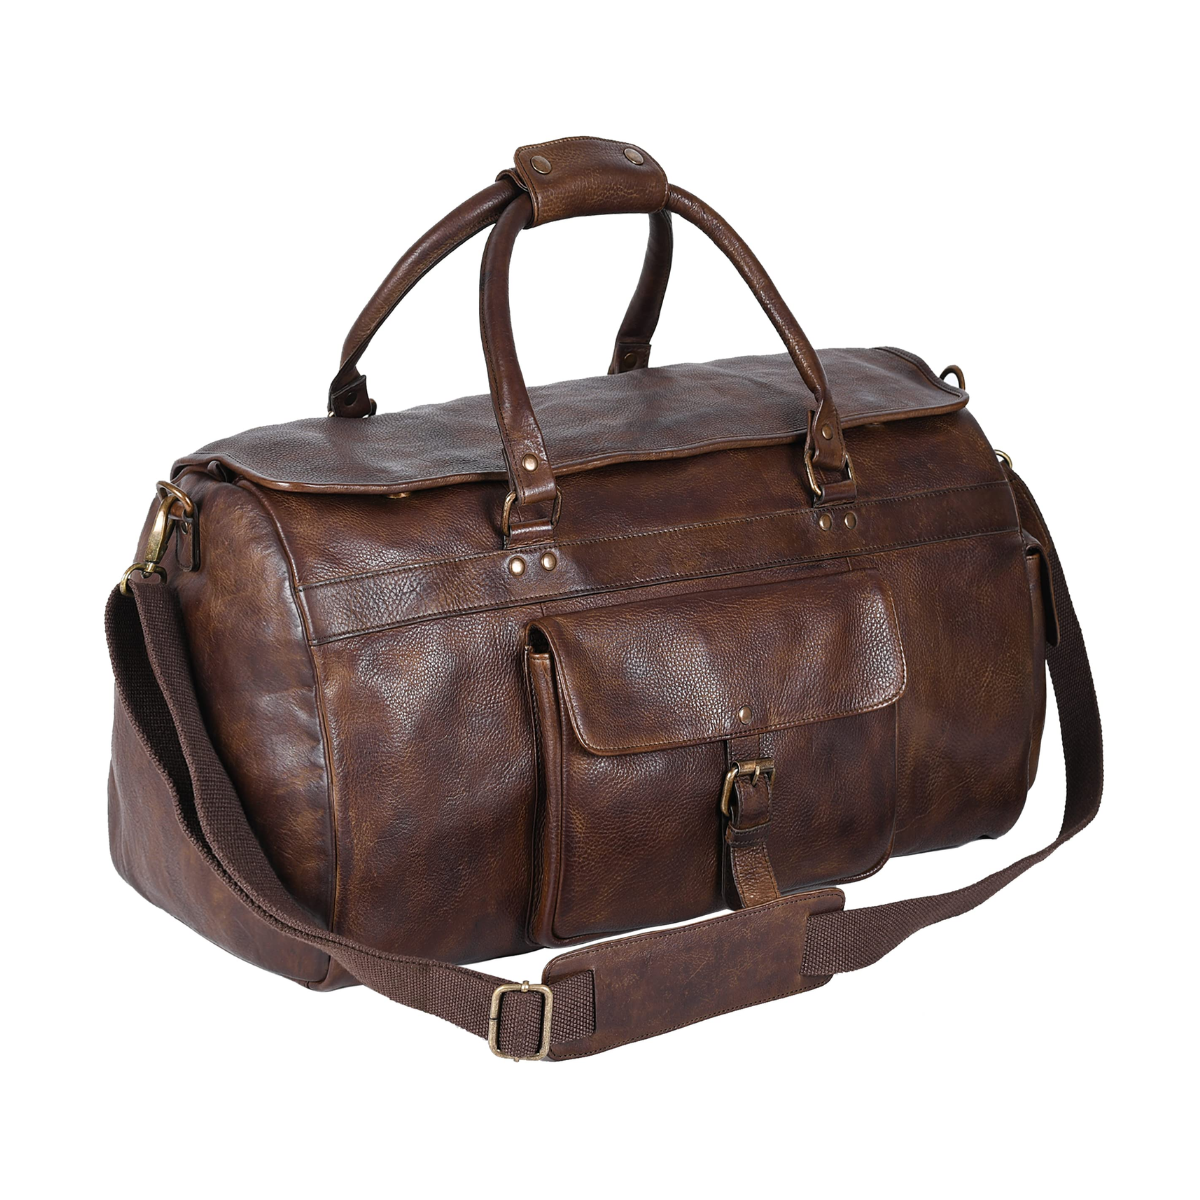 22. Timeless Elegance: Personalized Leather Travel Duffel Bag - A Perfect Anniversary Gift for Him